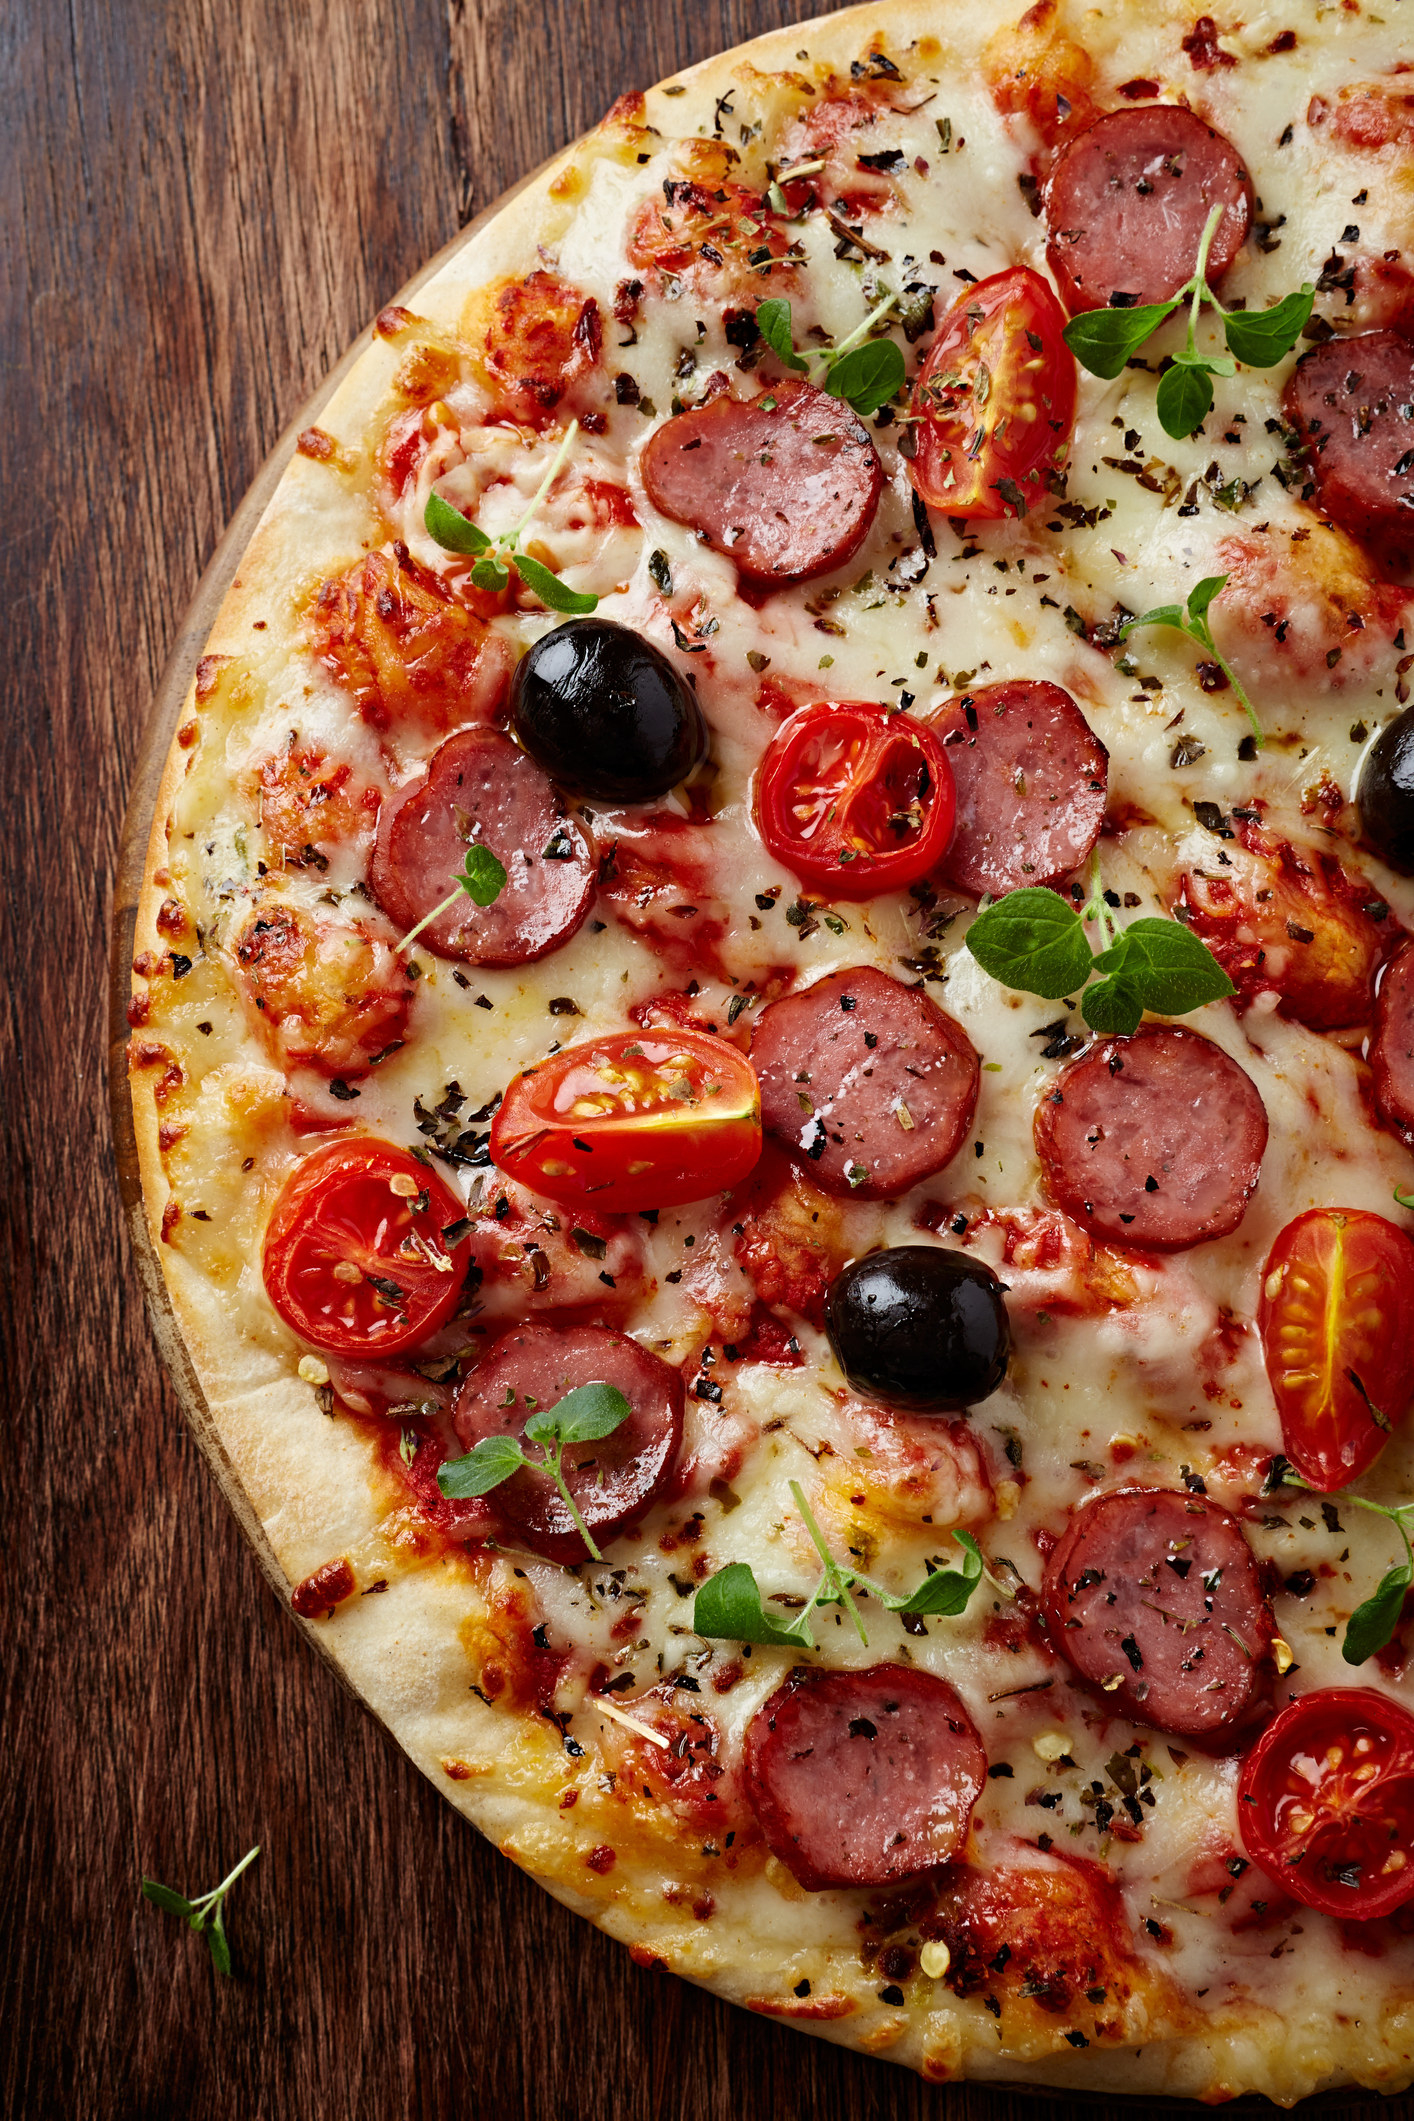 Pizza with pepperoni, cherry tomatoes and olives.